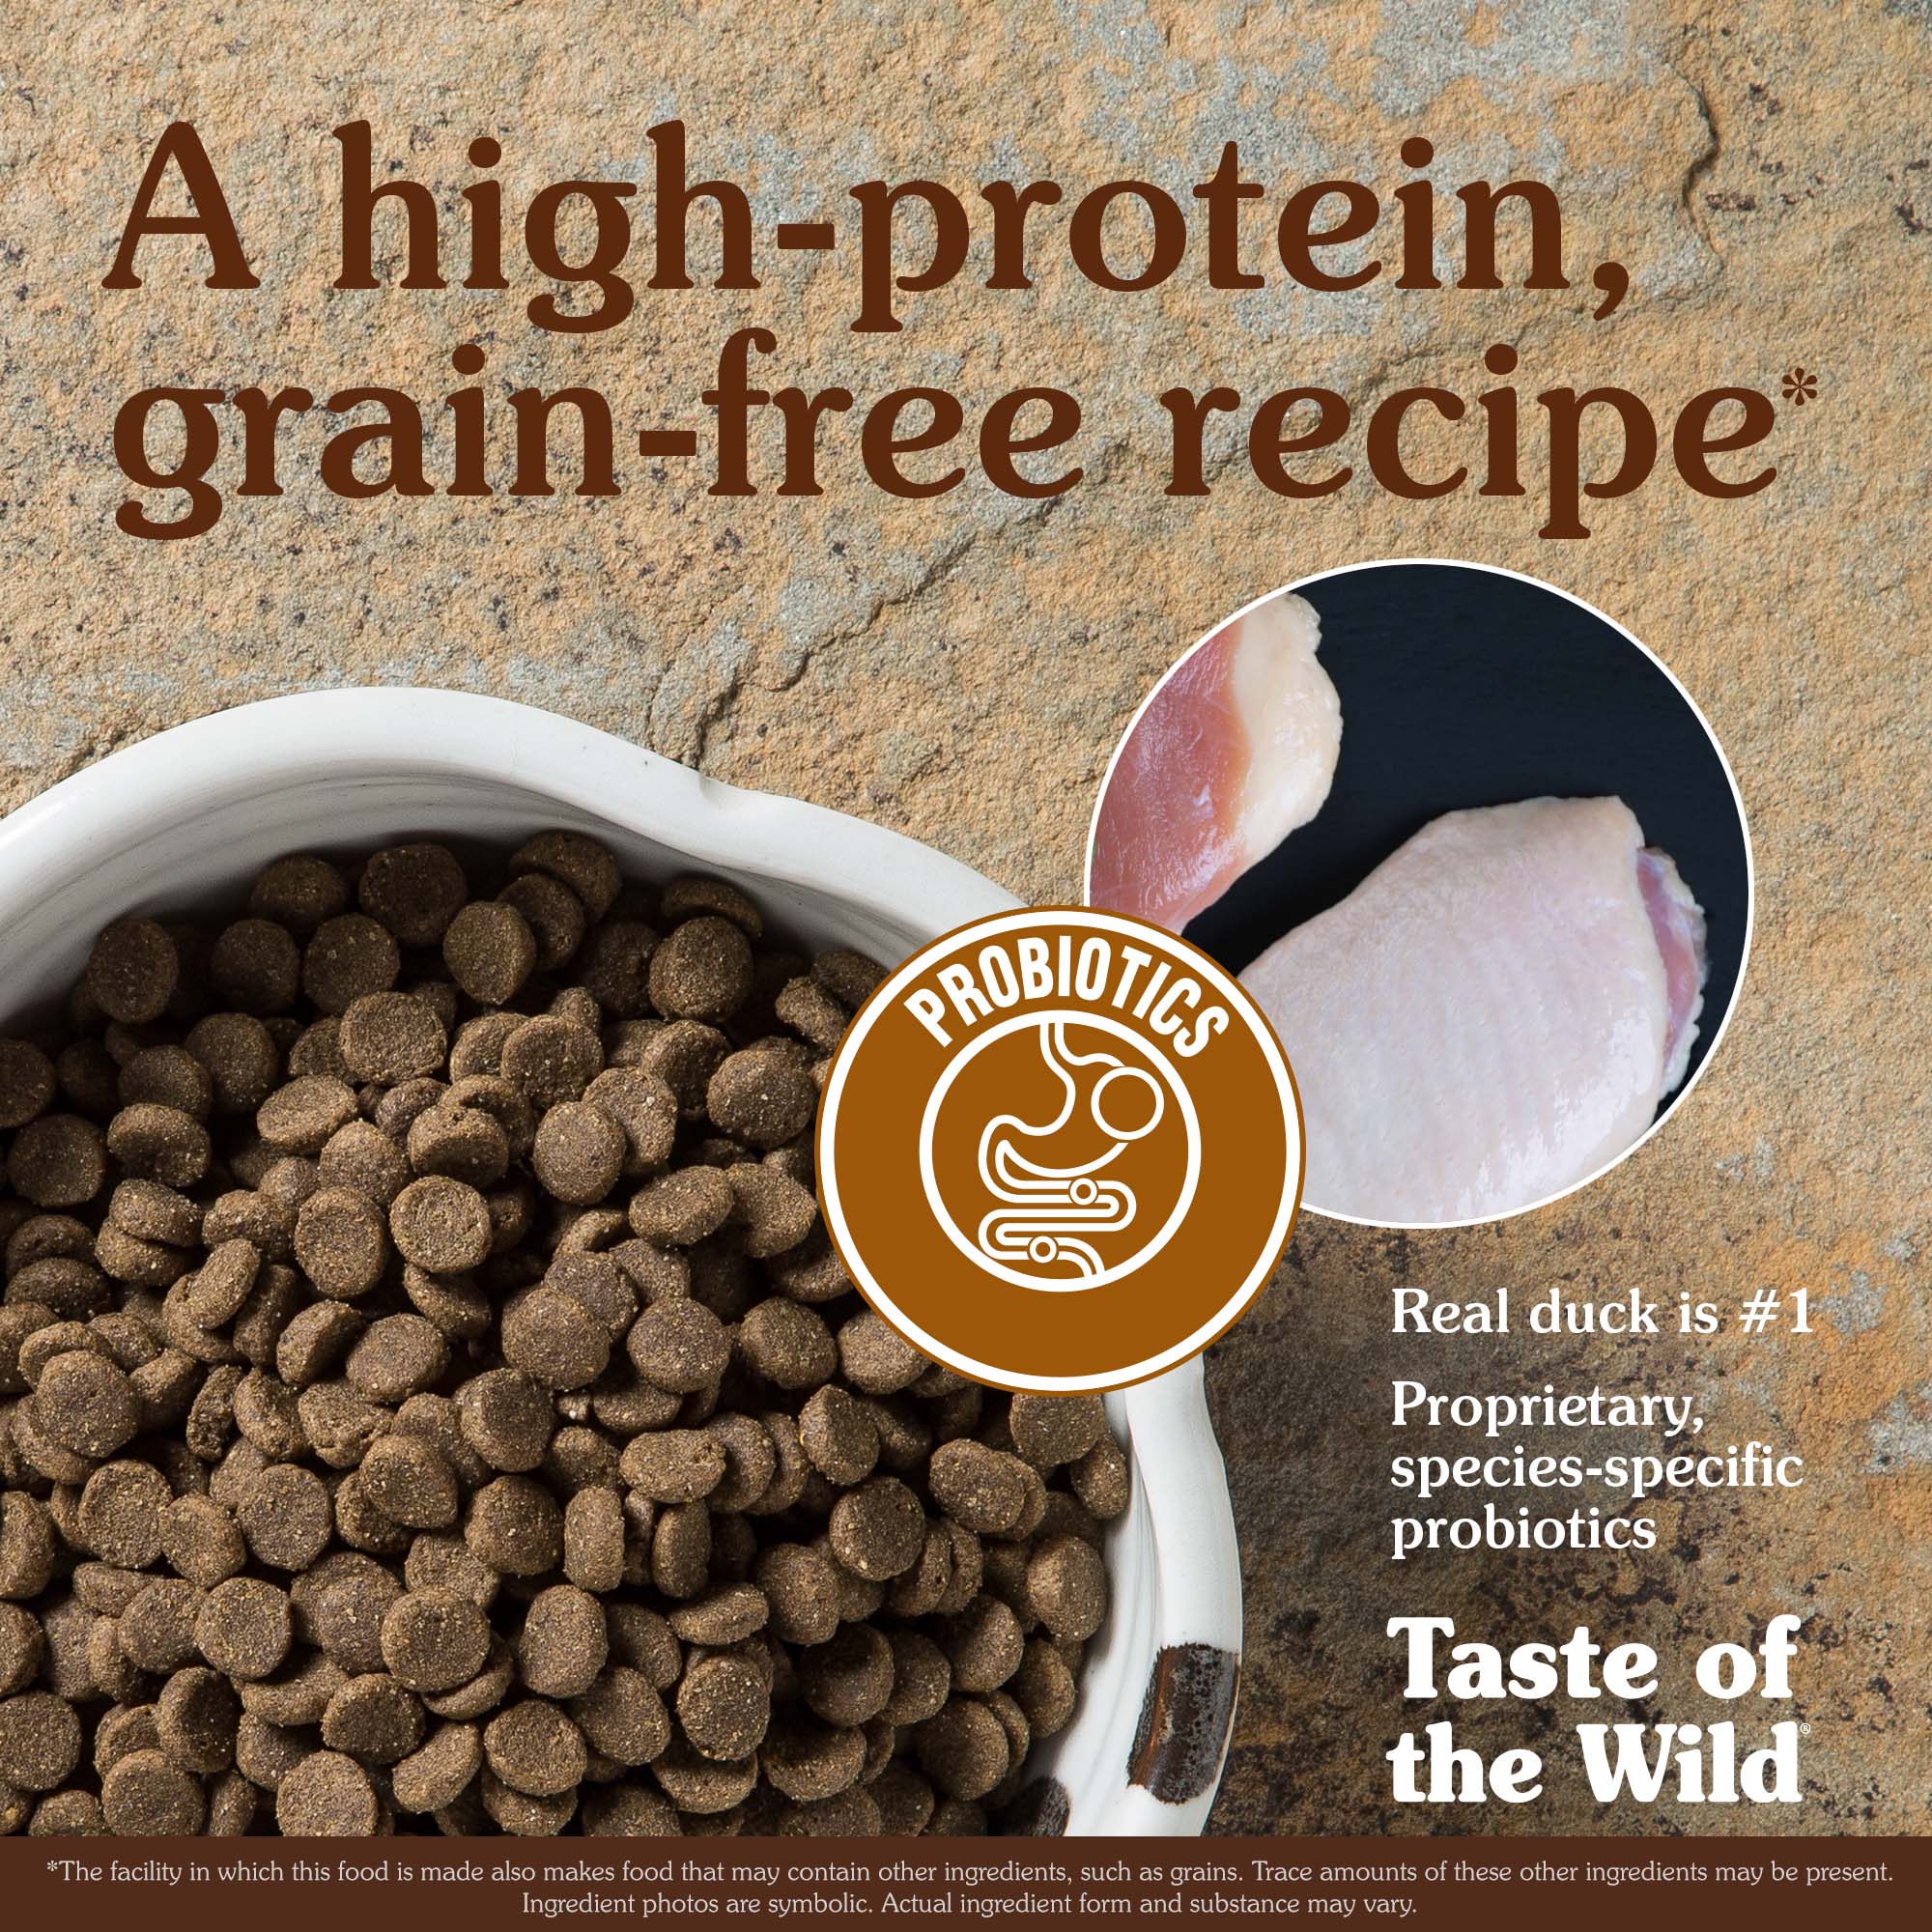 A white ceramic bowl full of Wetlands Canine Recipe with Roasted Fowl kibble with a circular overlay image containing a cut of real duck meat.